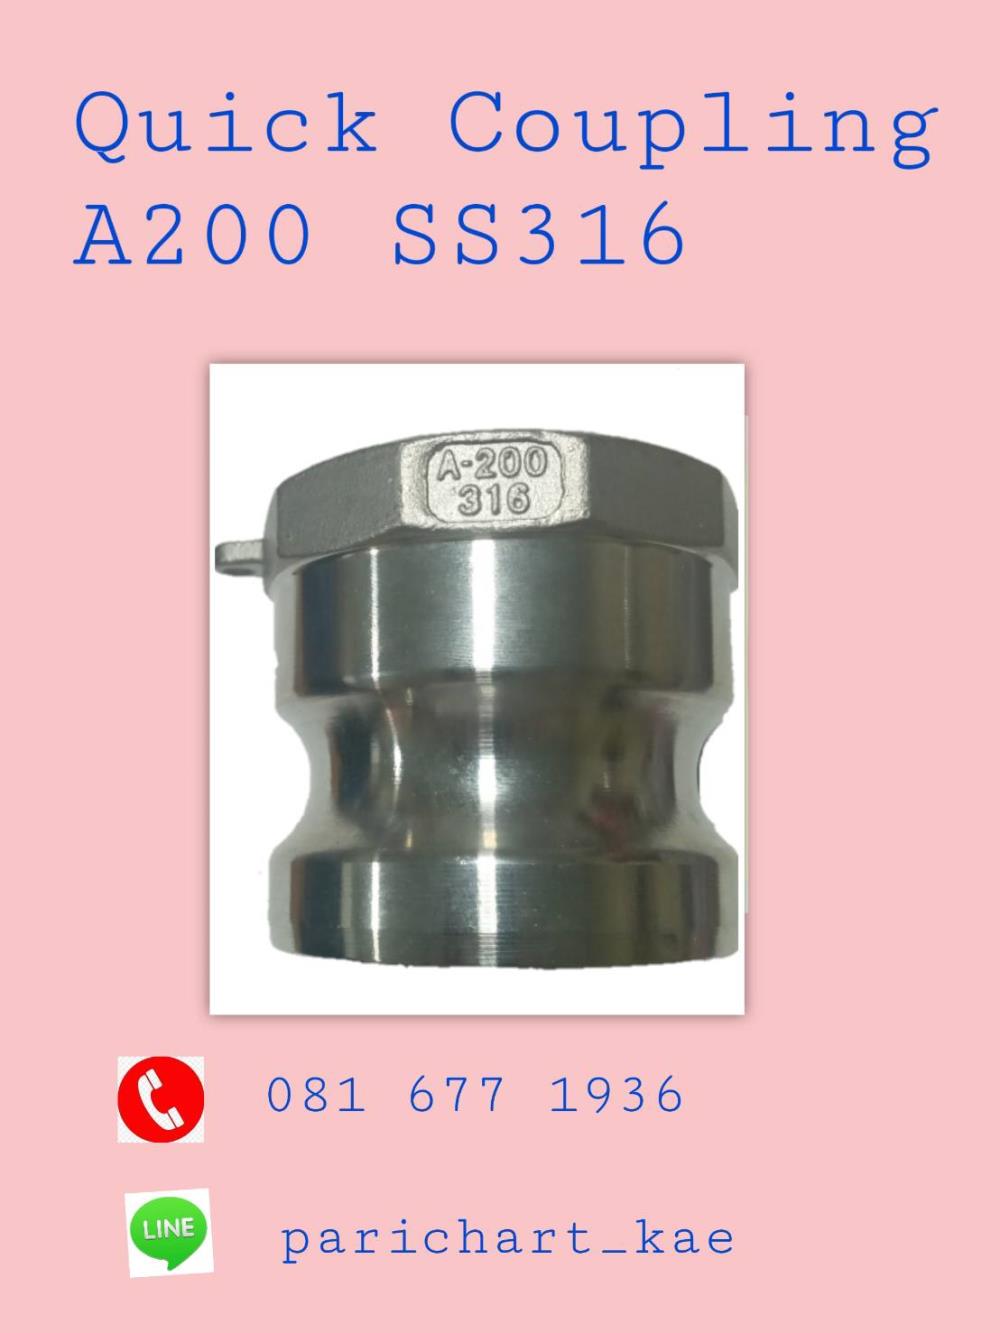 Quick Coupling A200 SS316,SS316,,Pumps, Valves and Accessories/Pipe